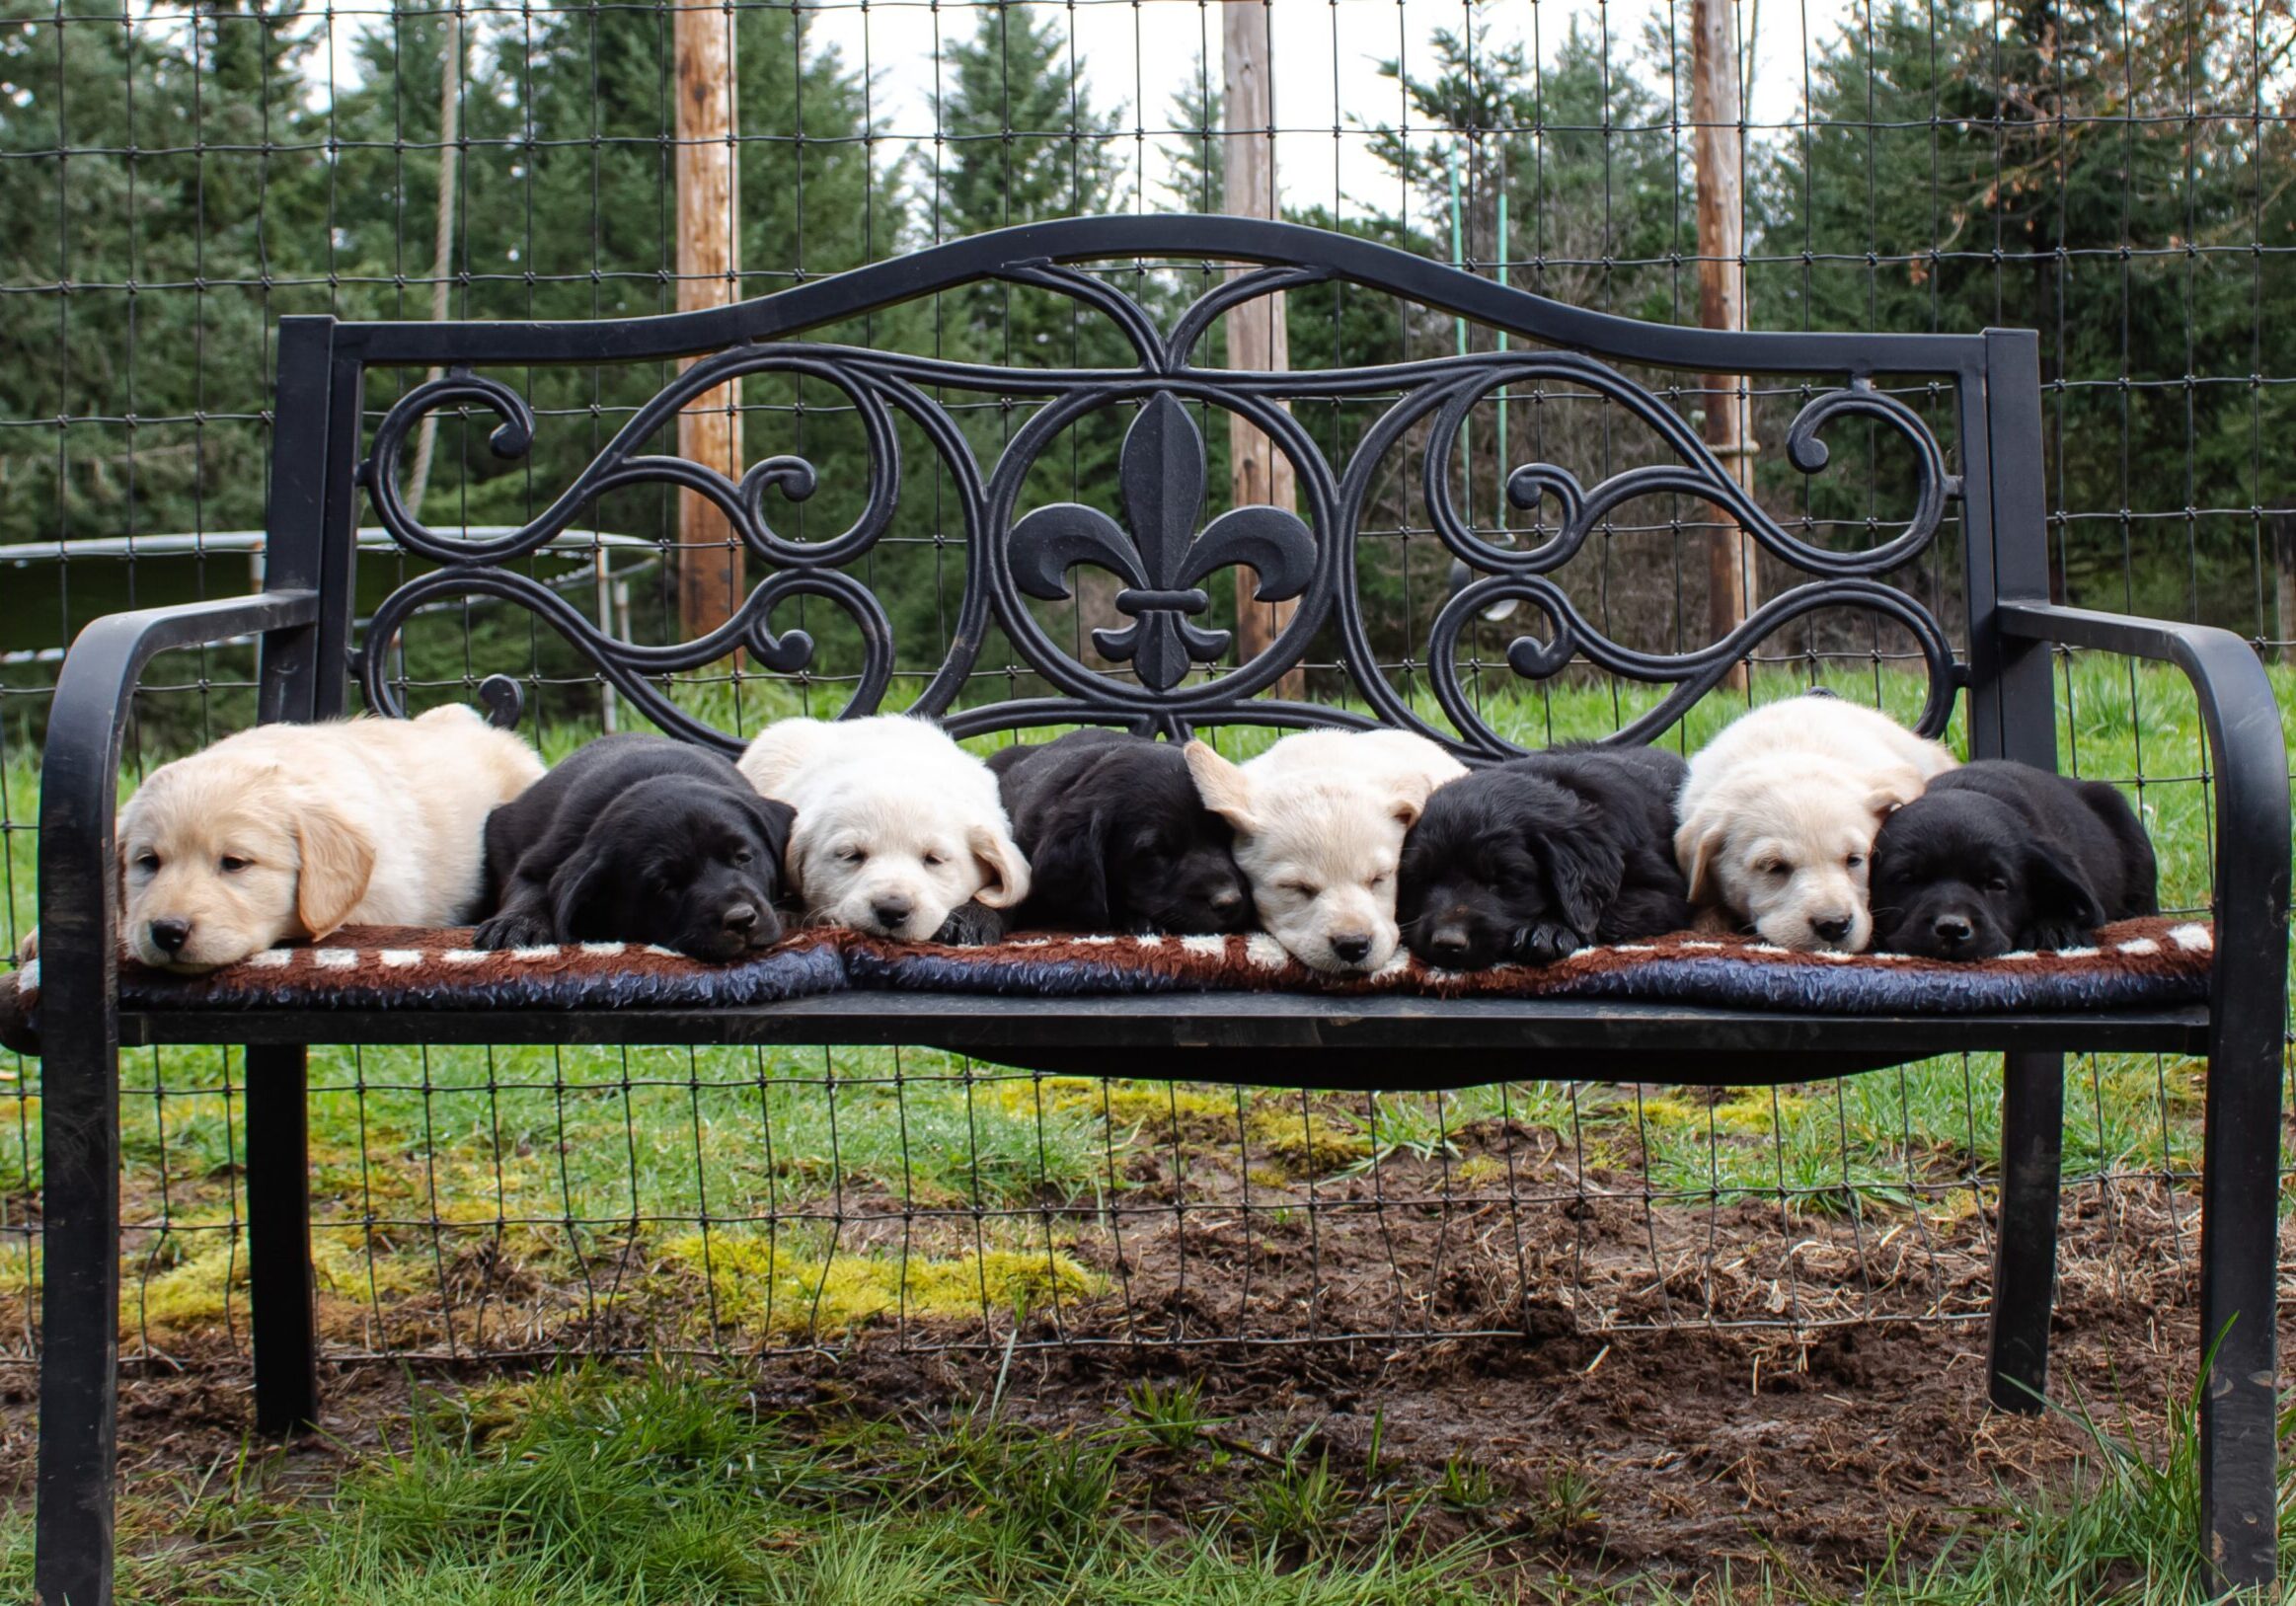 Eight Goldador Puppies on a bench resting.